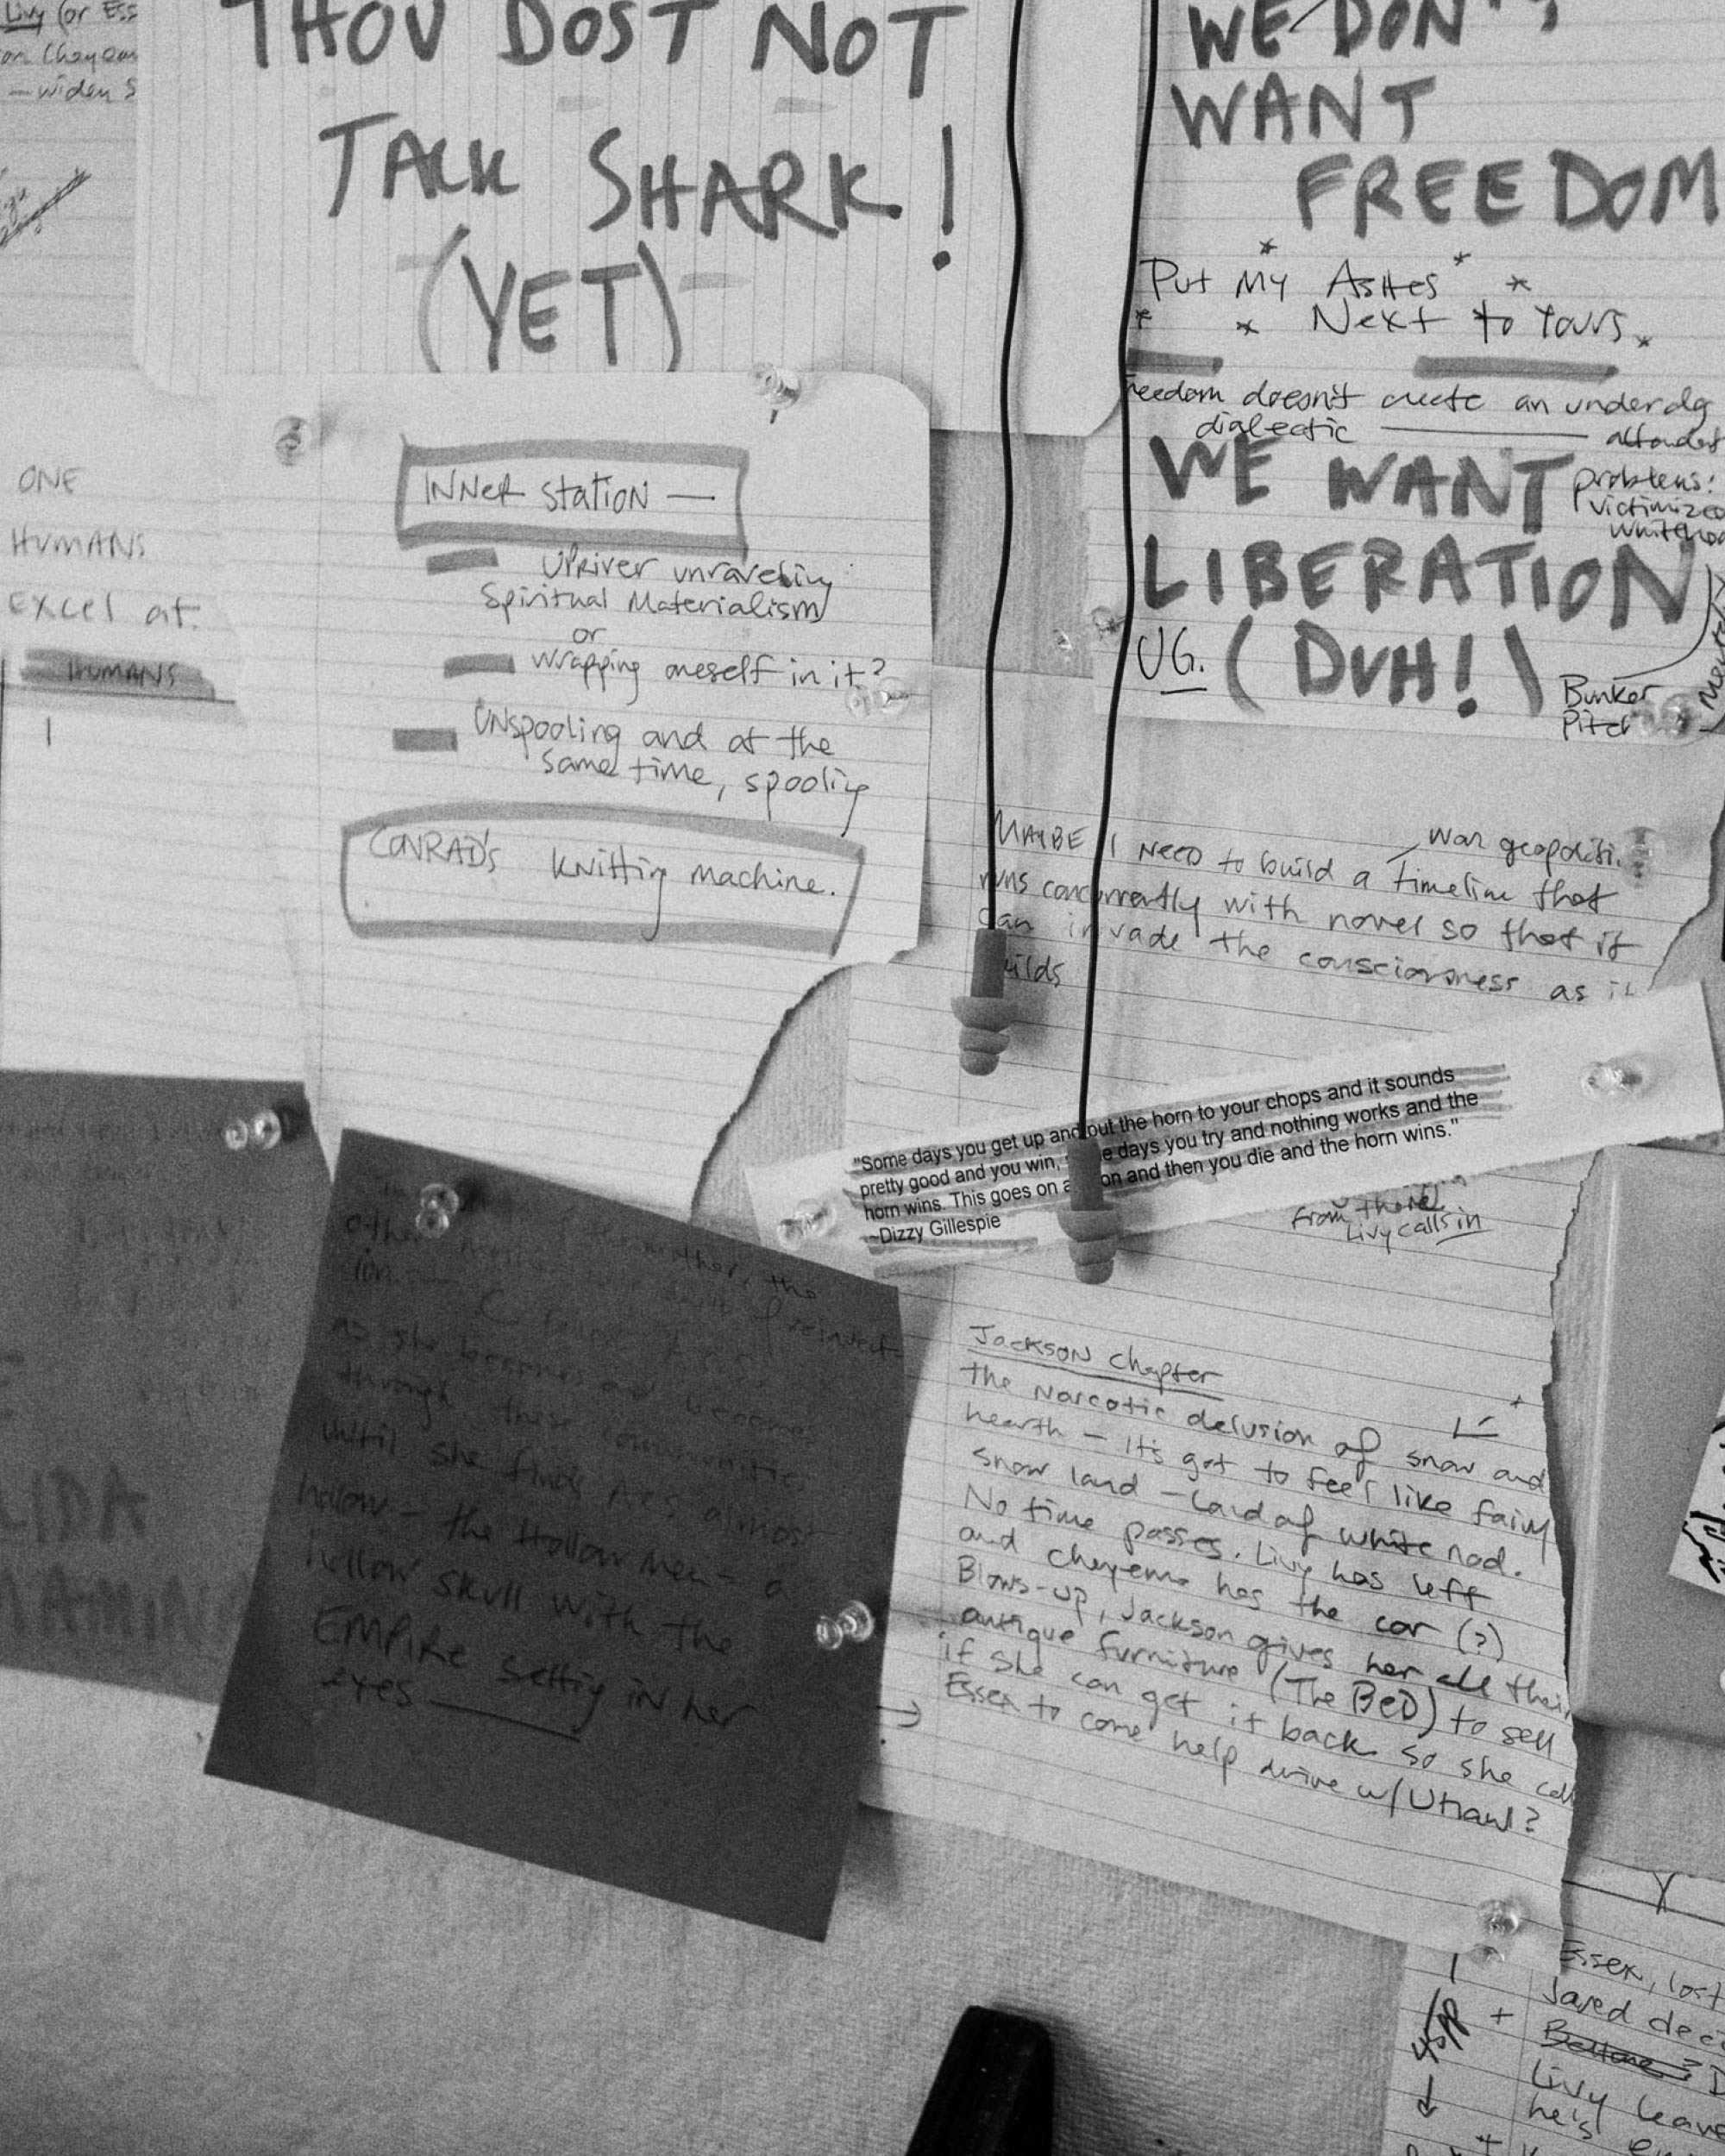 Veselka’s notes above her desk at the MacDowell studio. Photo by Robert Johansson.